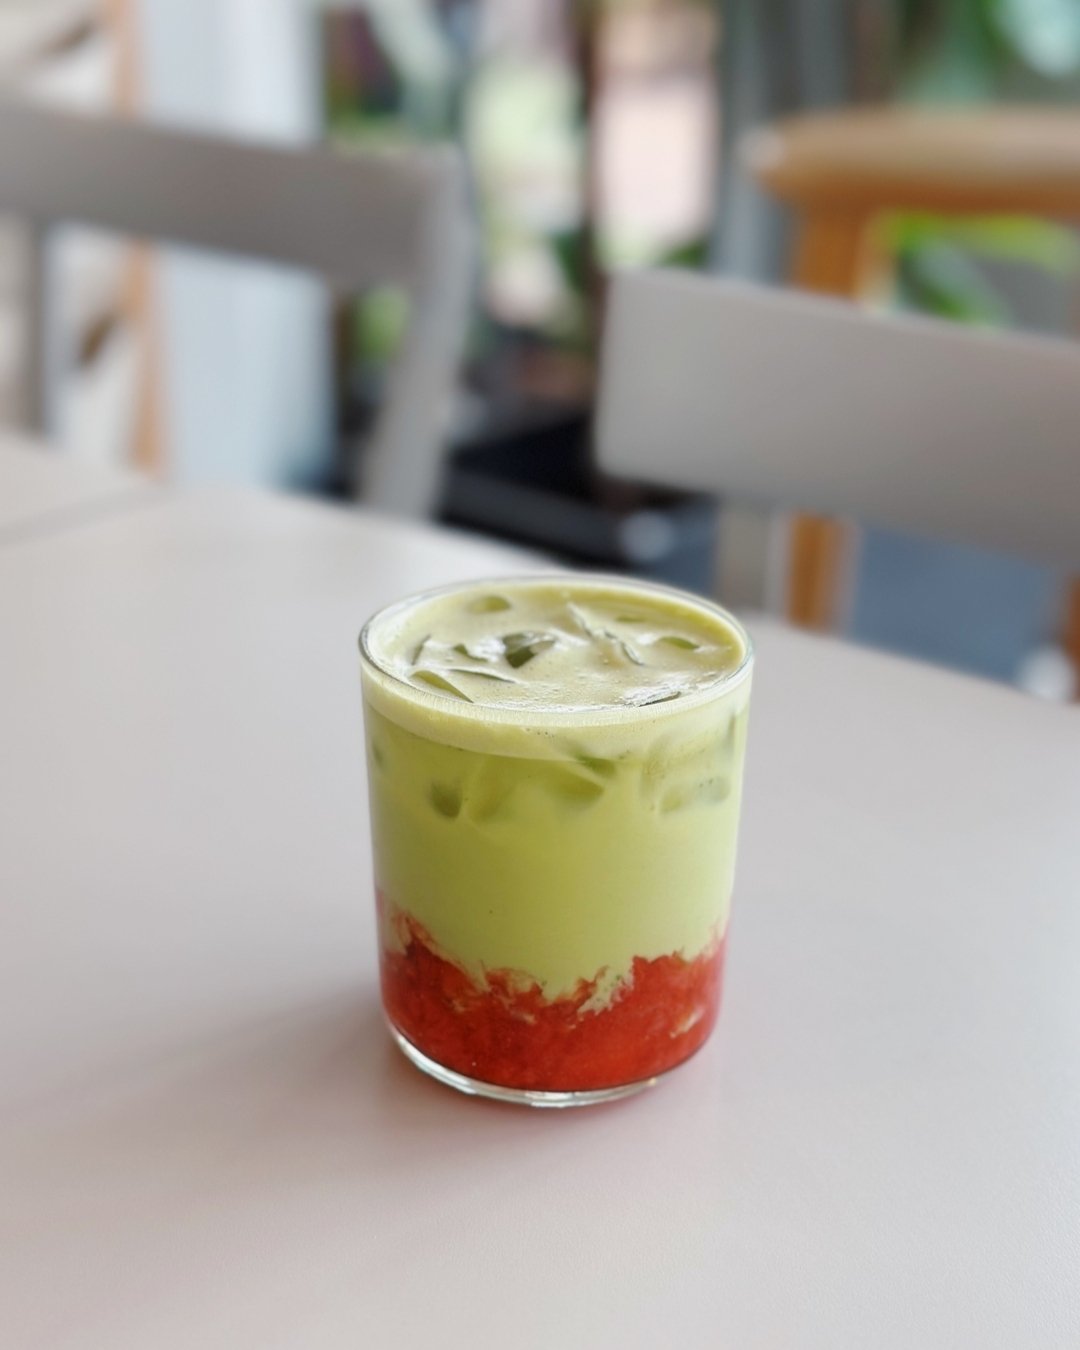 Introducing our newest OBSESSION... 

Our Strawberry Matcha 💚🍓

Join us &amp; try our most asked for menu addition! 🫶